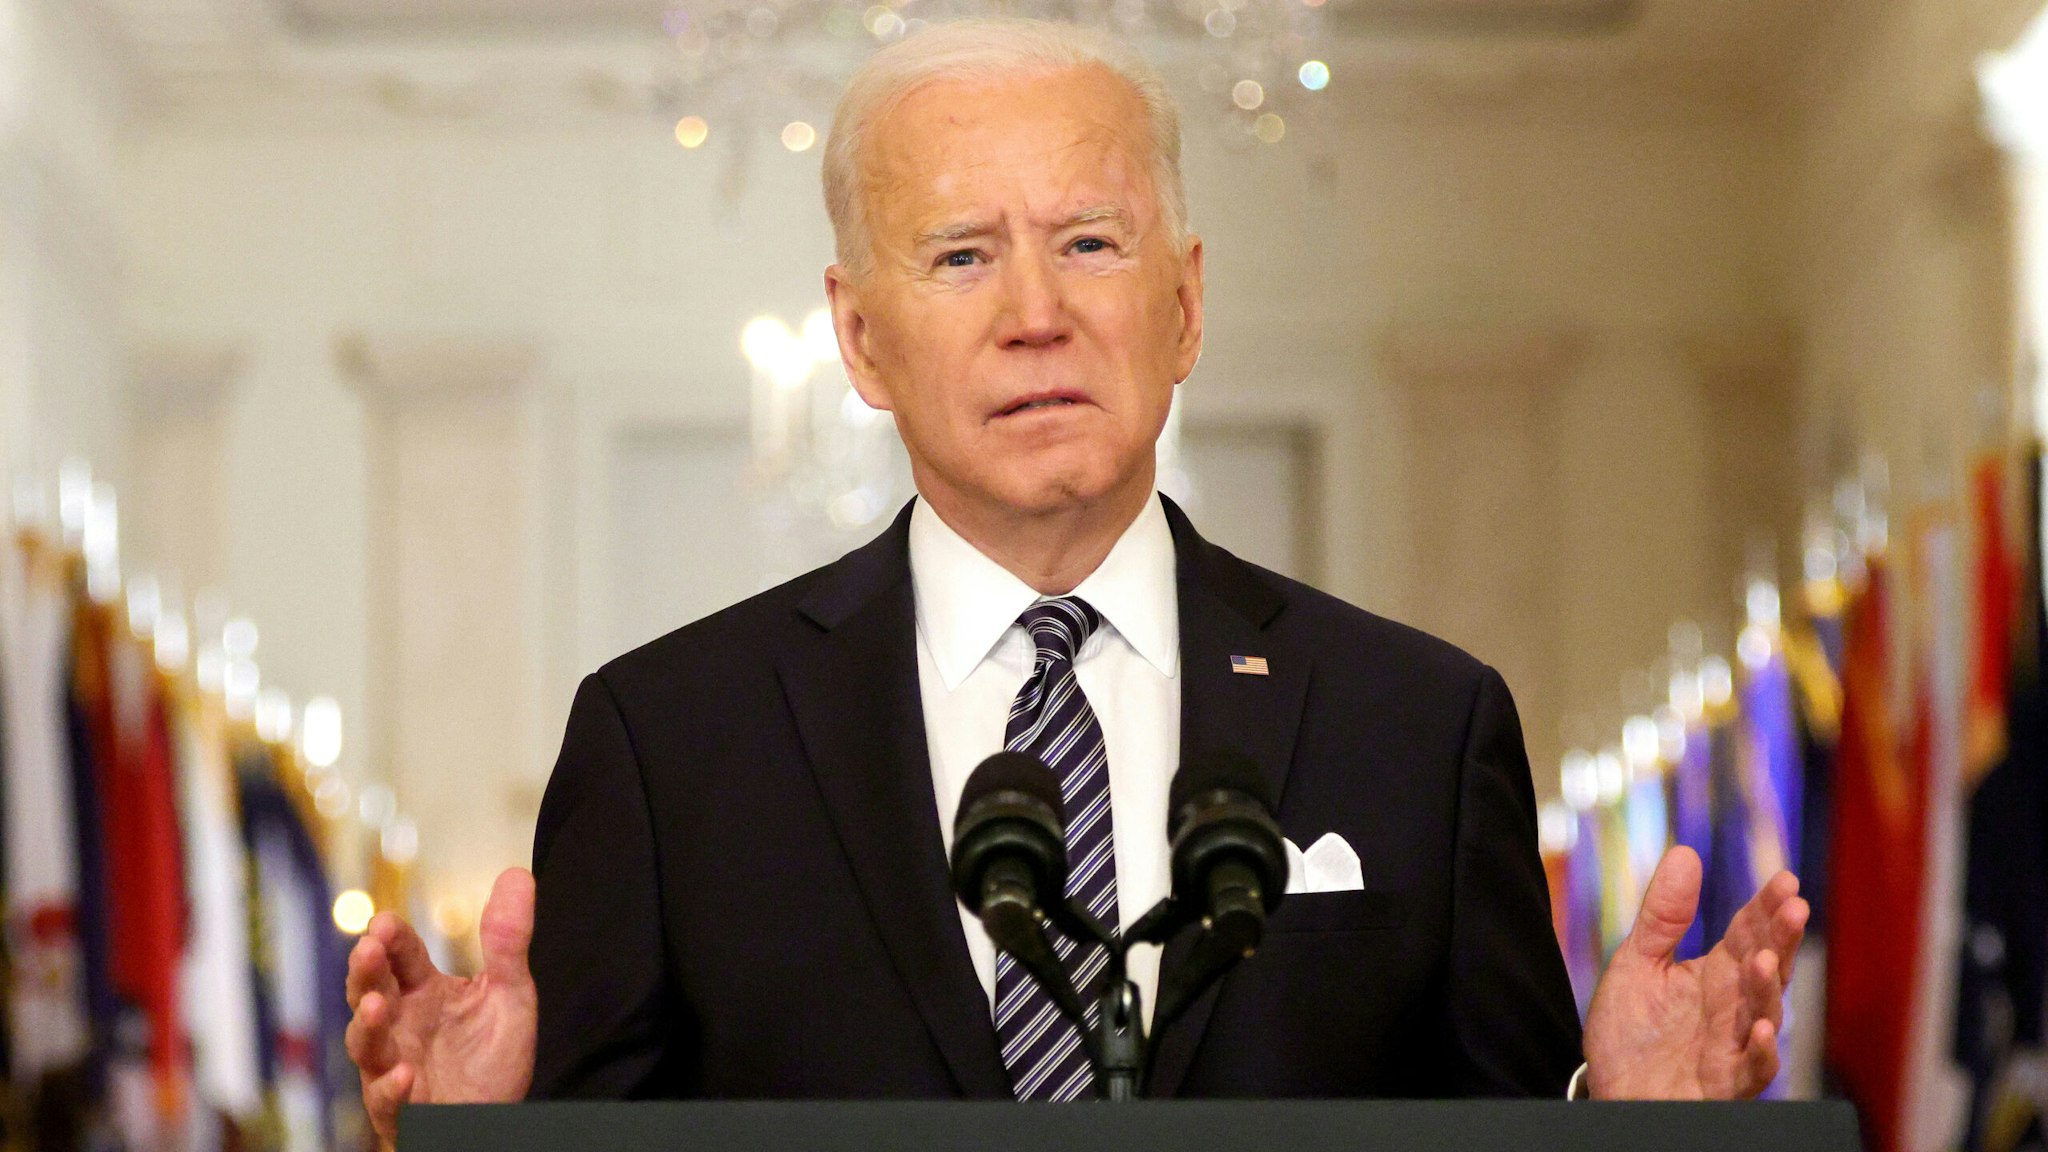 WASHINGTON, DC - MARCH 11: U.S. President Joe Biden speaks as he gives a primetime address to the nation from the East Room of the White House March 11, 2021 in Washington, DC. President Biden gave the address to mark the one-year anniversary of the shutdown due to the COVID-19 pandemic.